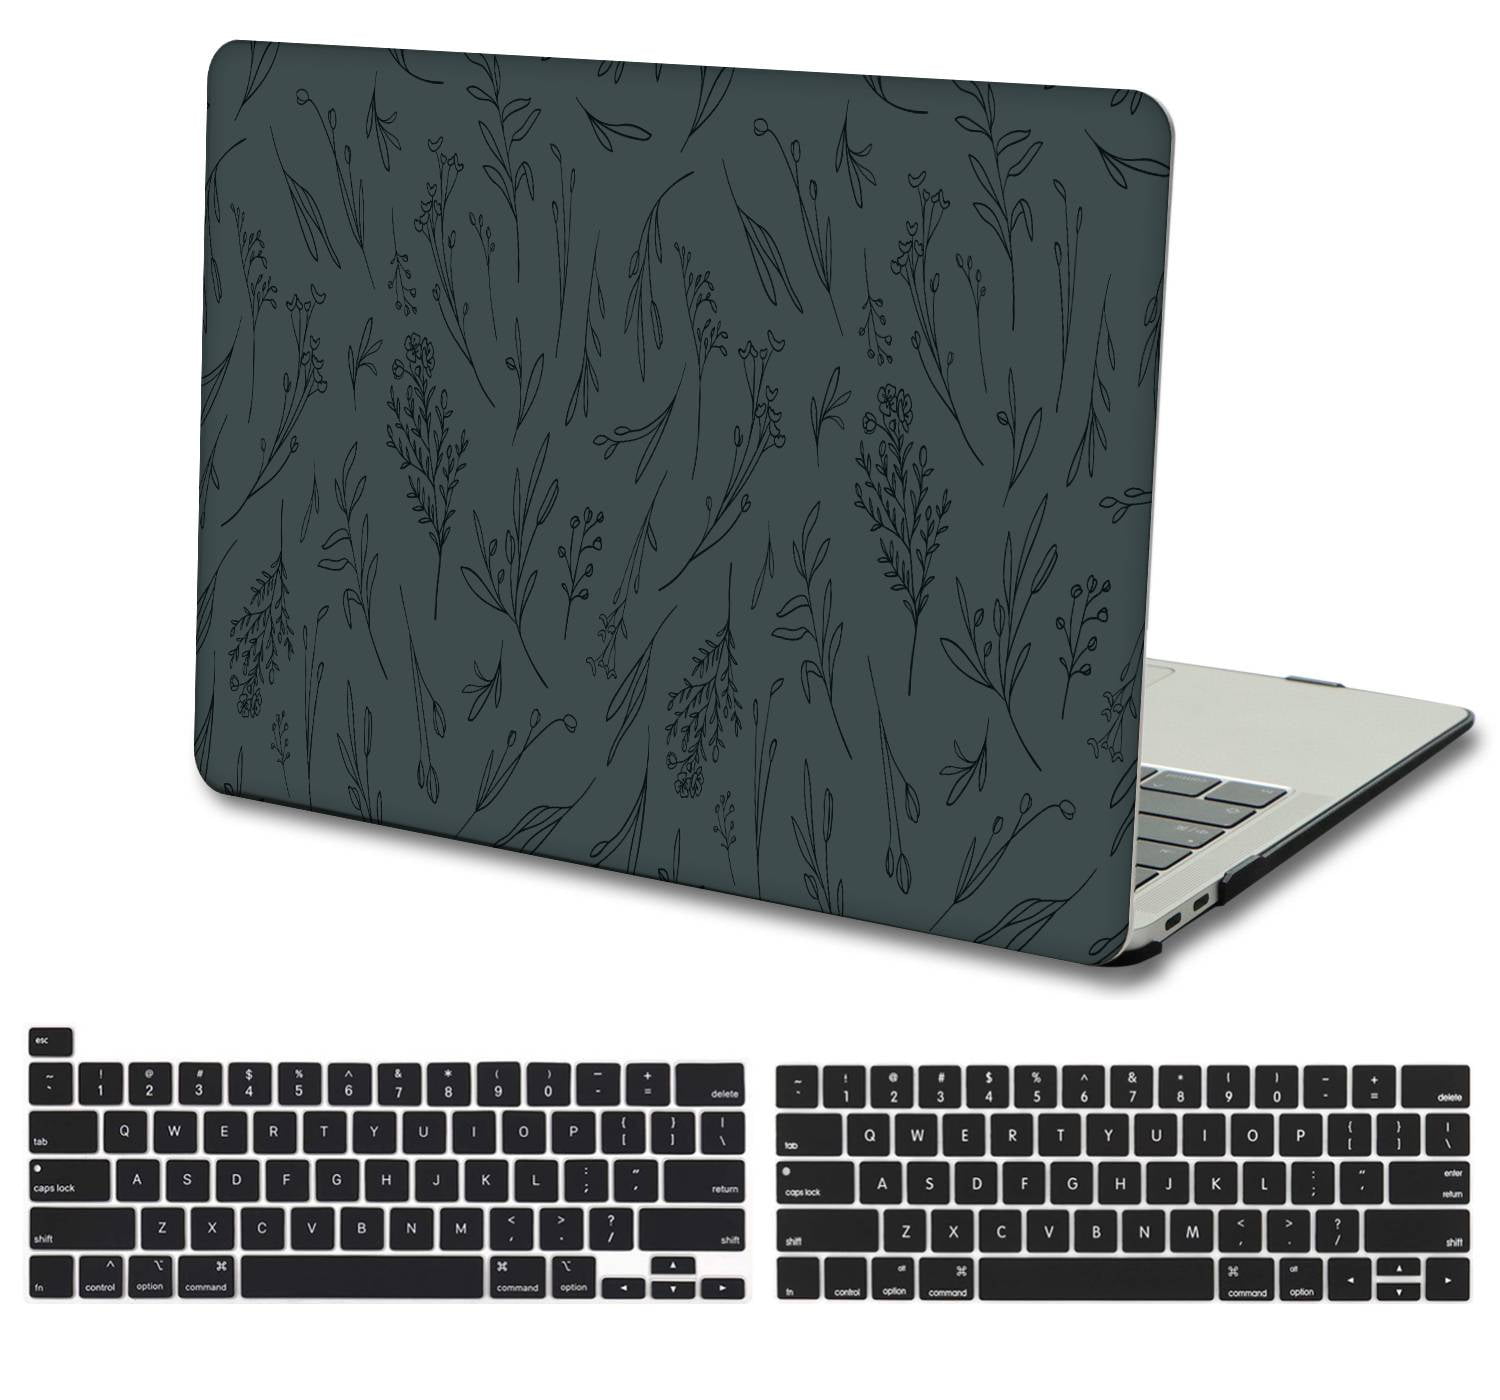 Snowy Mountain Forest Case For Apple Macbook 12 Air 11 13 Pro 13 15 2016/2017/2018 Inch Retina Display Touch Bar 